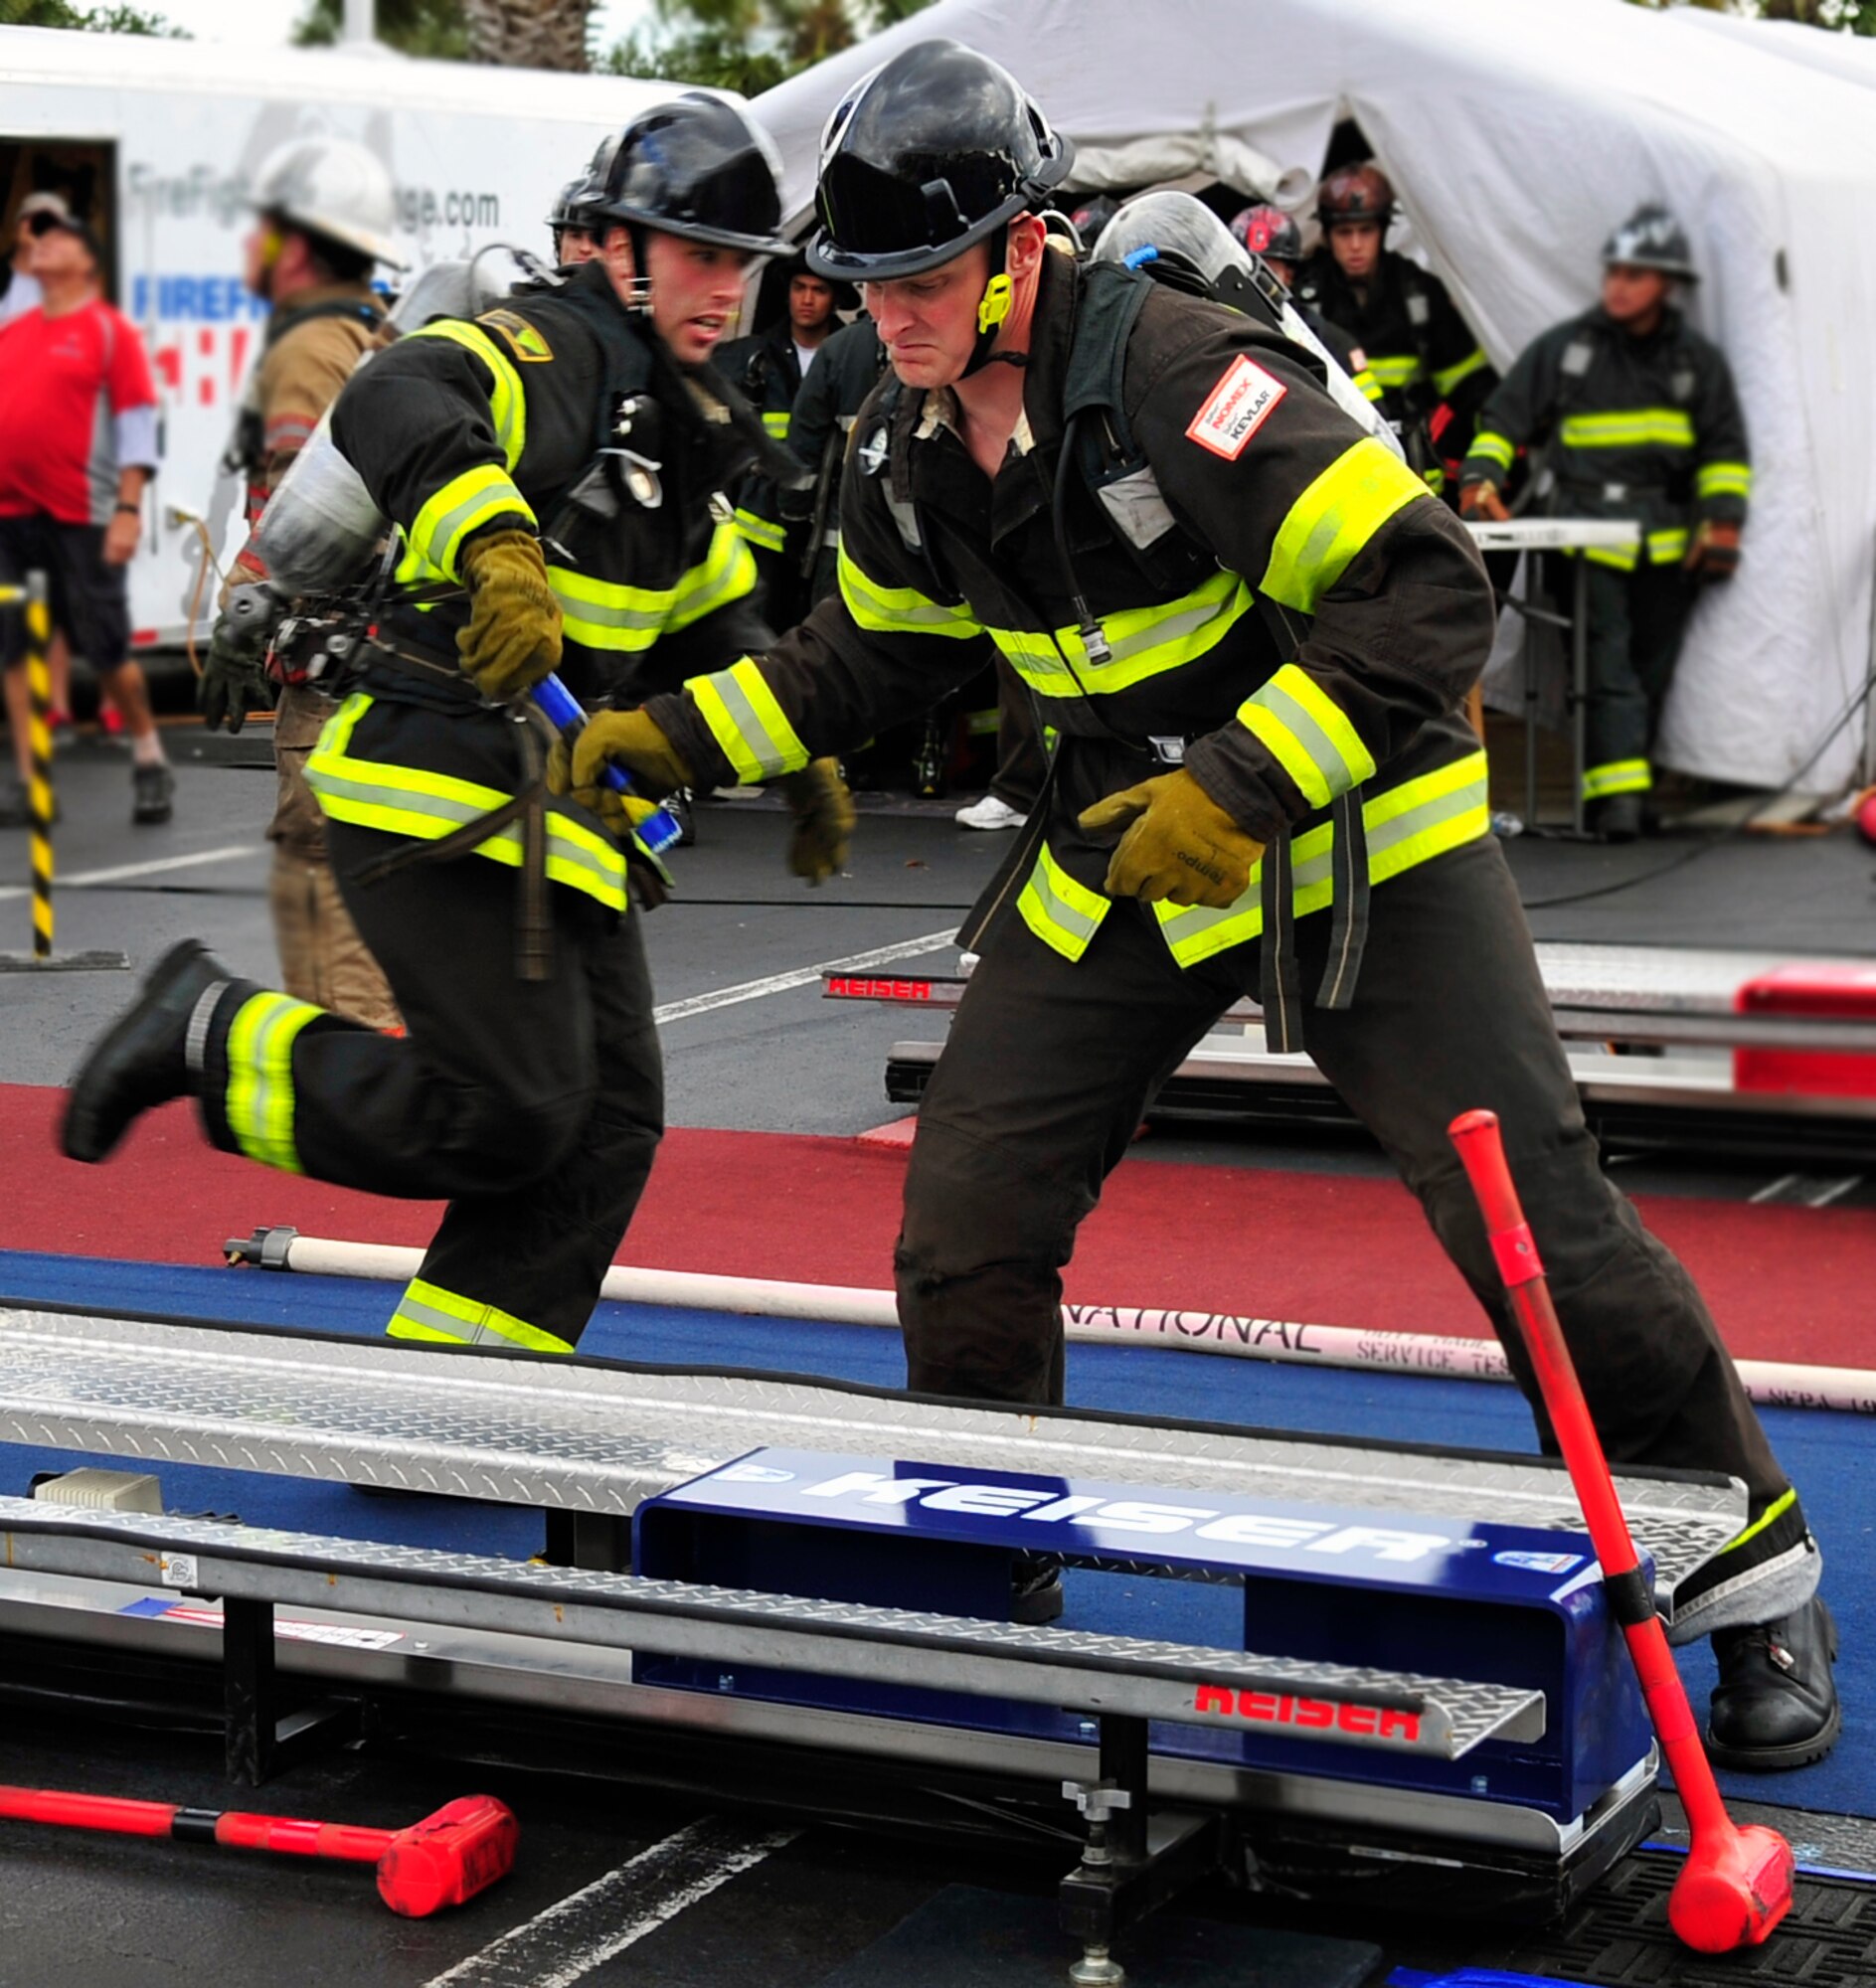 Staff Sgt. Steven Thomas, 20th Civil Engineer Squadron firefighter, passes the baton off to Tech. Sgt. Marcus Hewett, 20th CES firefighter, during the five-man relay at the Scott Firefighter Combat Challenge world competition at Myrtle Beach, S.C., Nov. 15, 2011. The 20th CES firefighters competed against 180 teams from around the world. (U.S. Air Force photo/Airman 1st Class Daniel Phelps/Released)